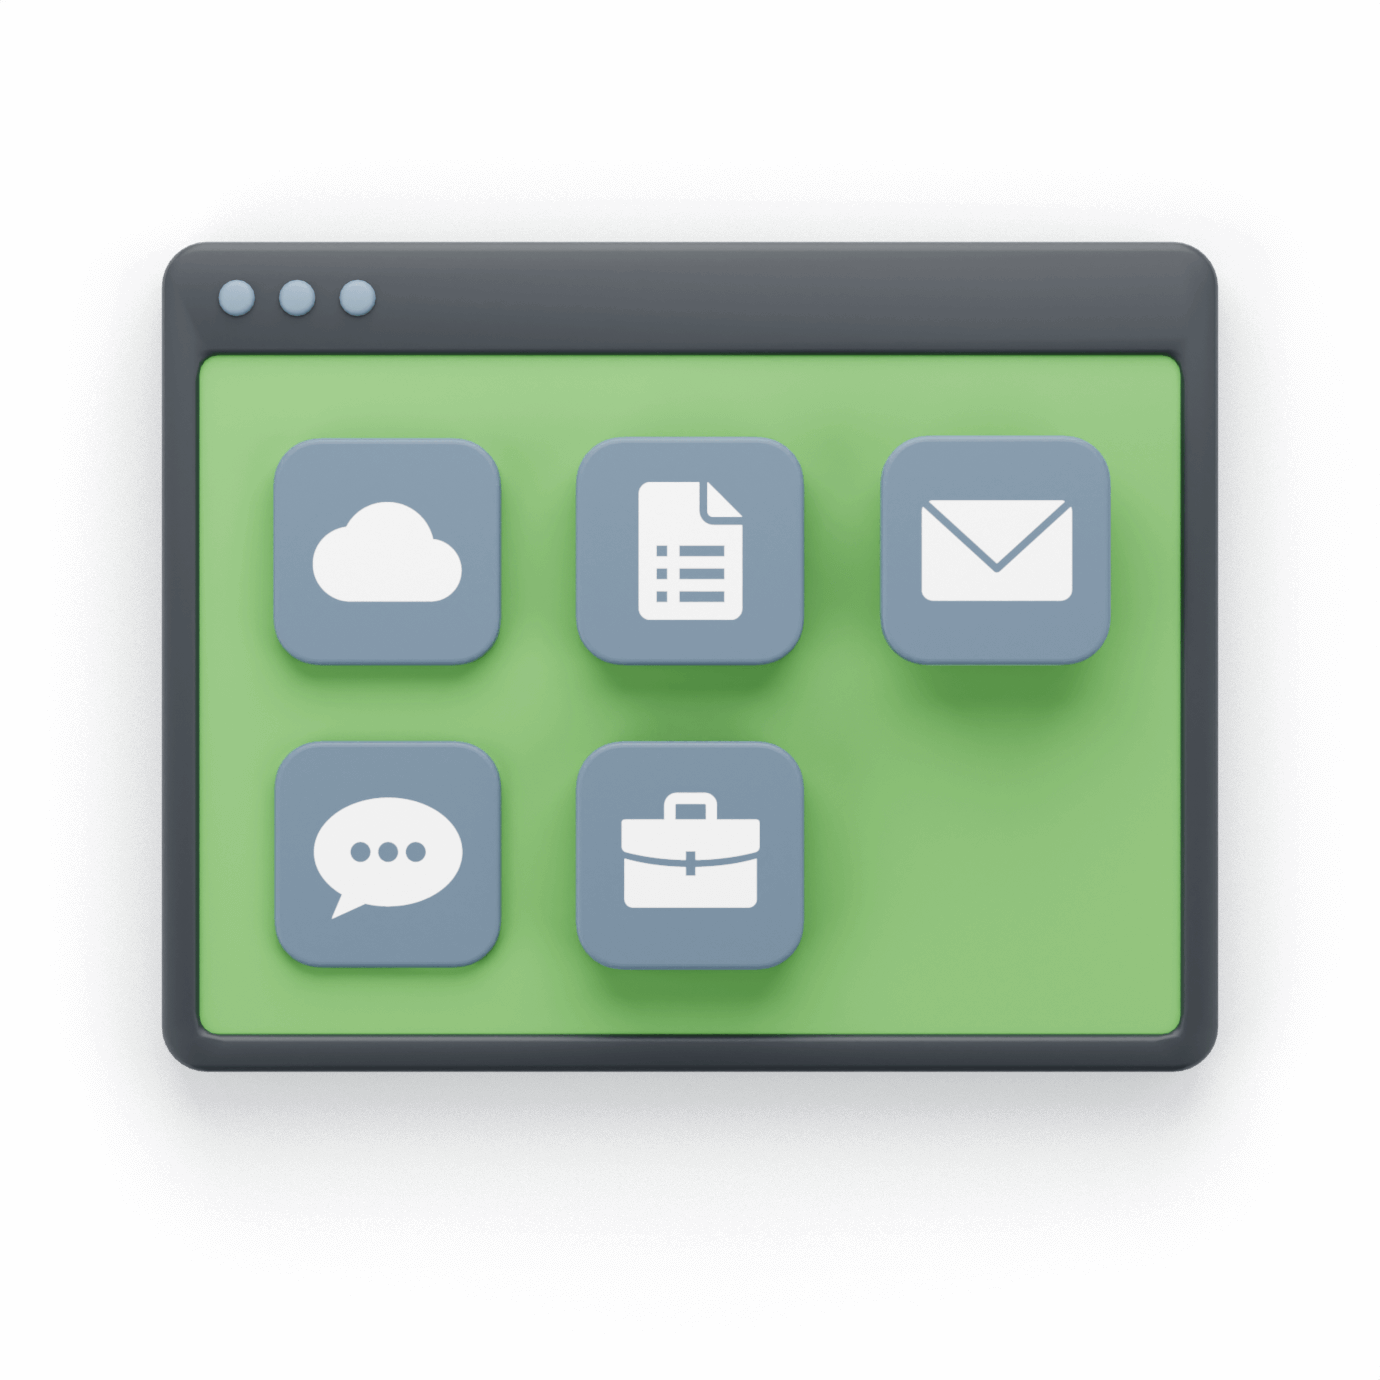 Window with various app icons